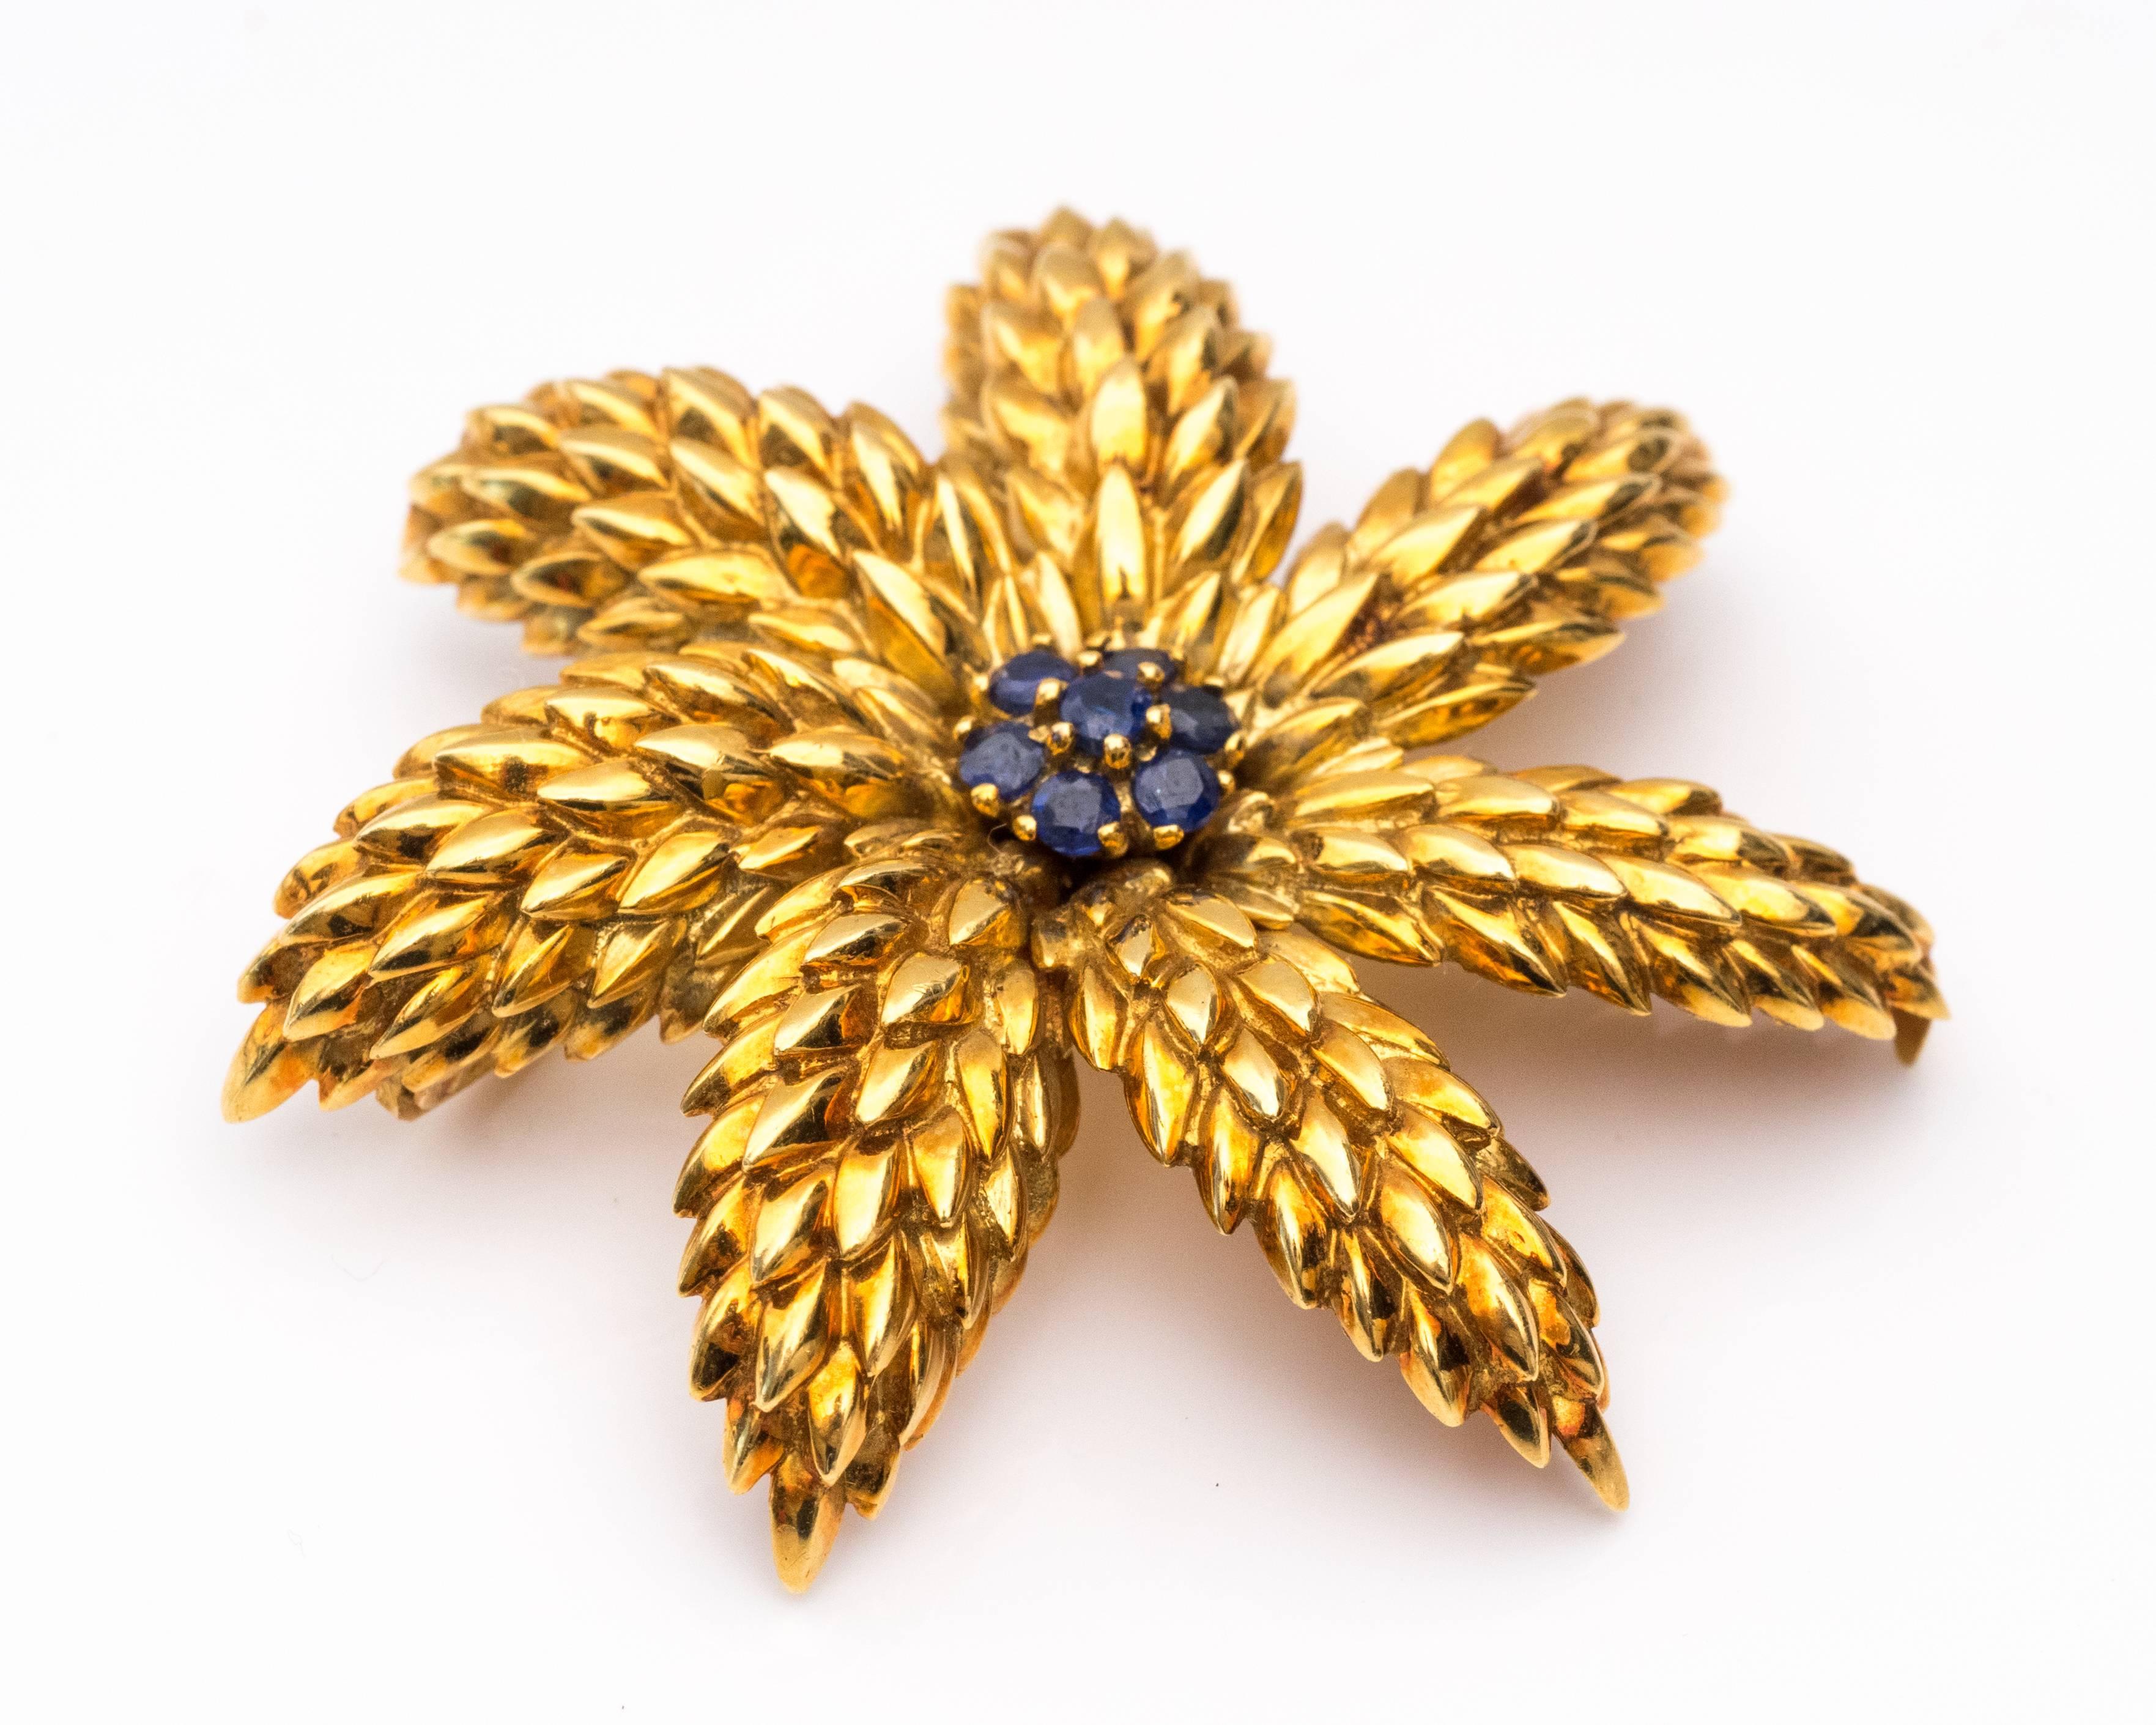 1950s Retro Tiffany and Co. Brooch - 18K Yellow Gold, Blue Sapphires 

The textured petals have a lovely patina. 7 Blue Sapphires form the flower center. 

This brooch exemplifies Jean Schlumberger's flair for lively designs inspired by nature.